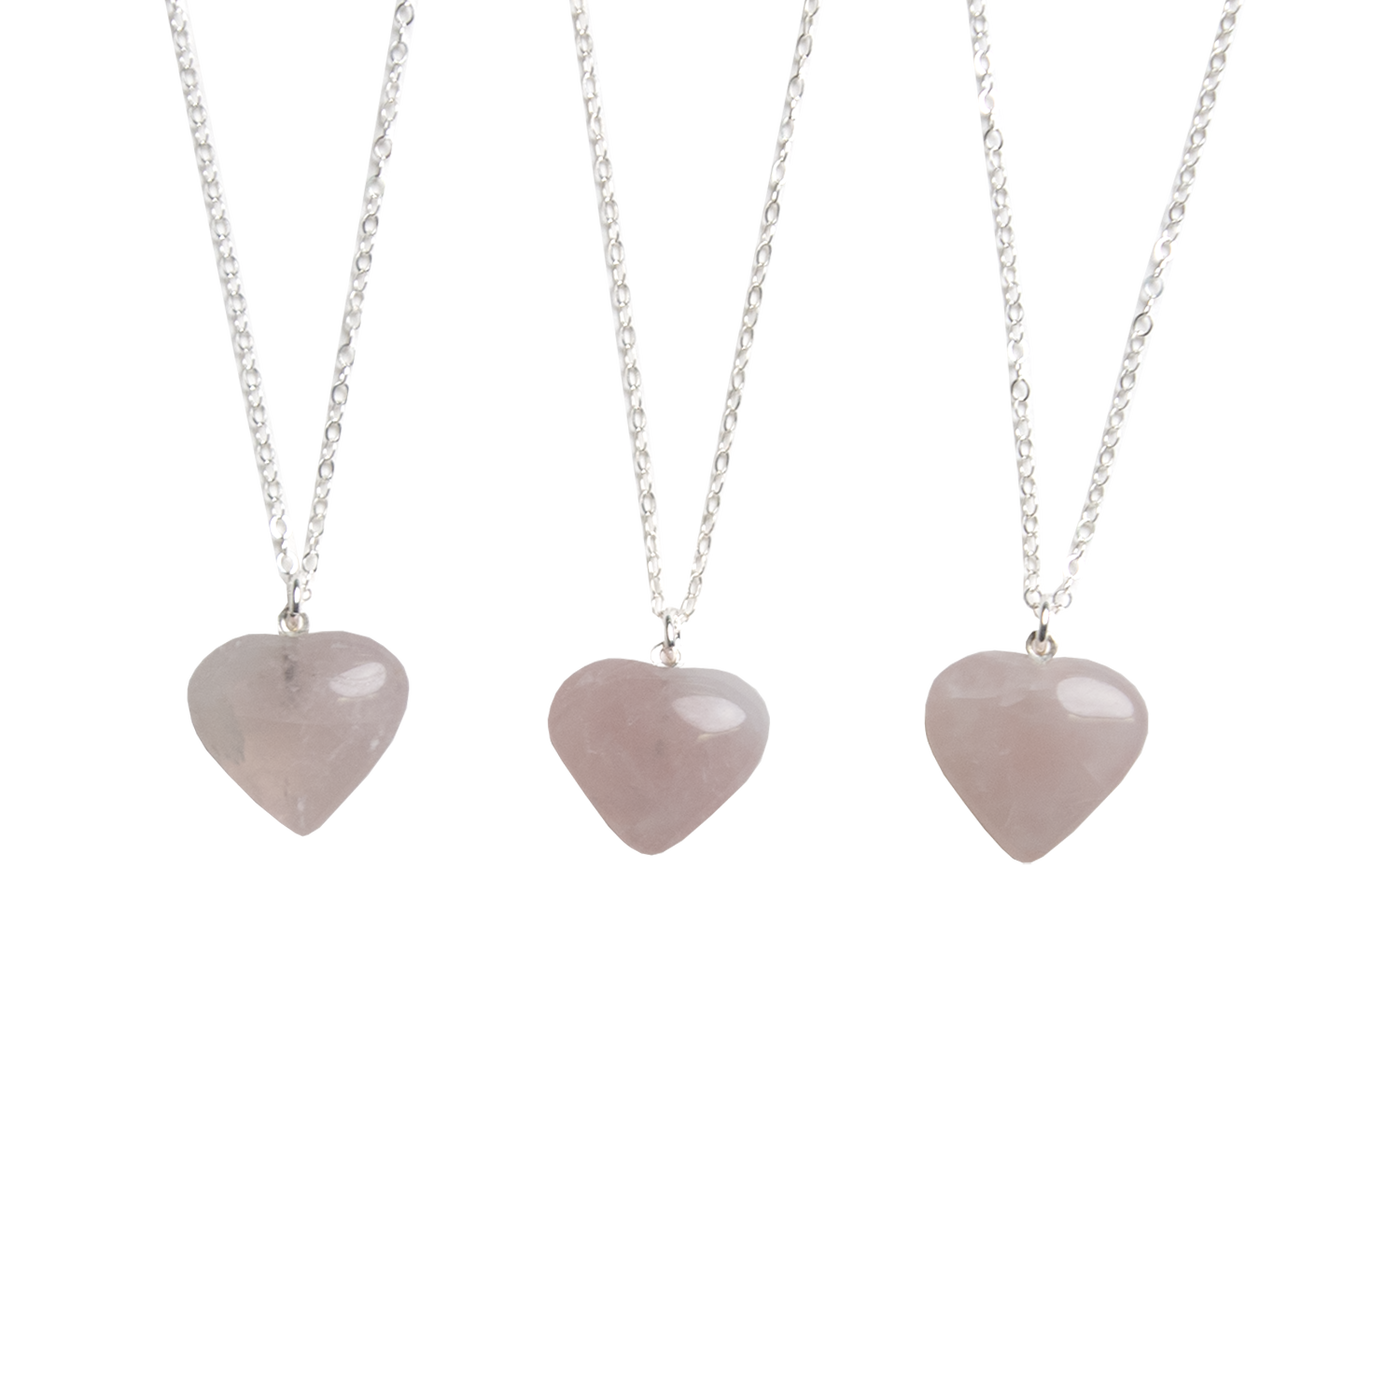 3 genuine Rose Quartz heart-shaped crystal pendant necklace on silver polished chain by Energy Muse showing variation